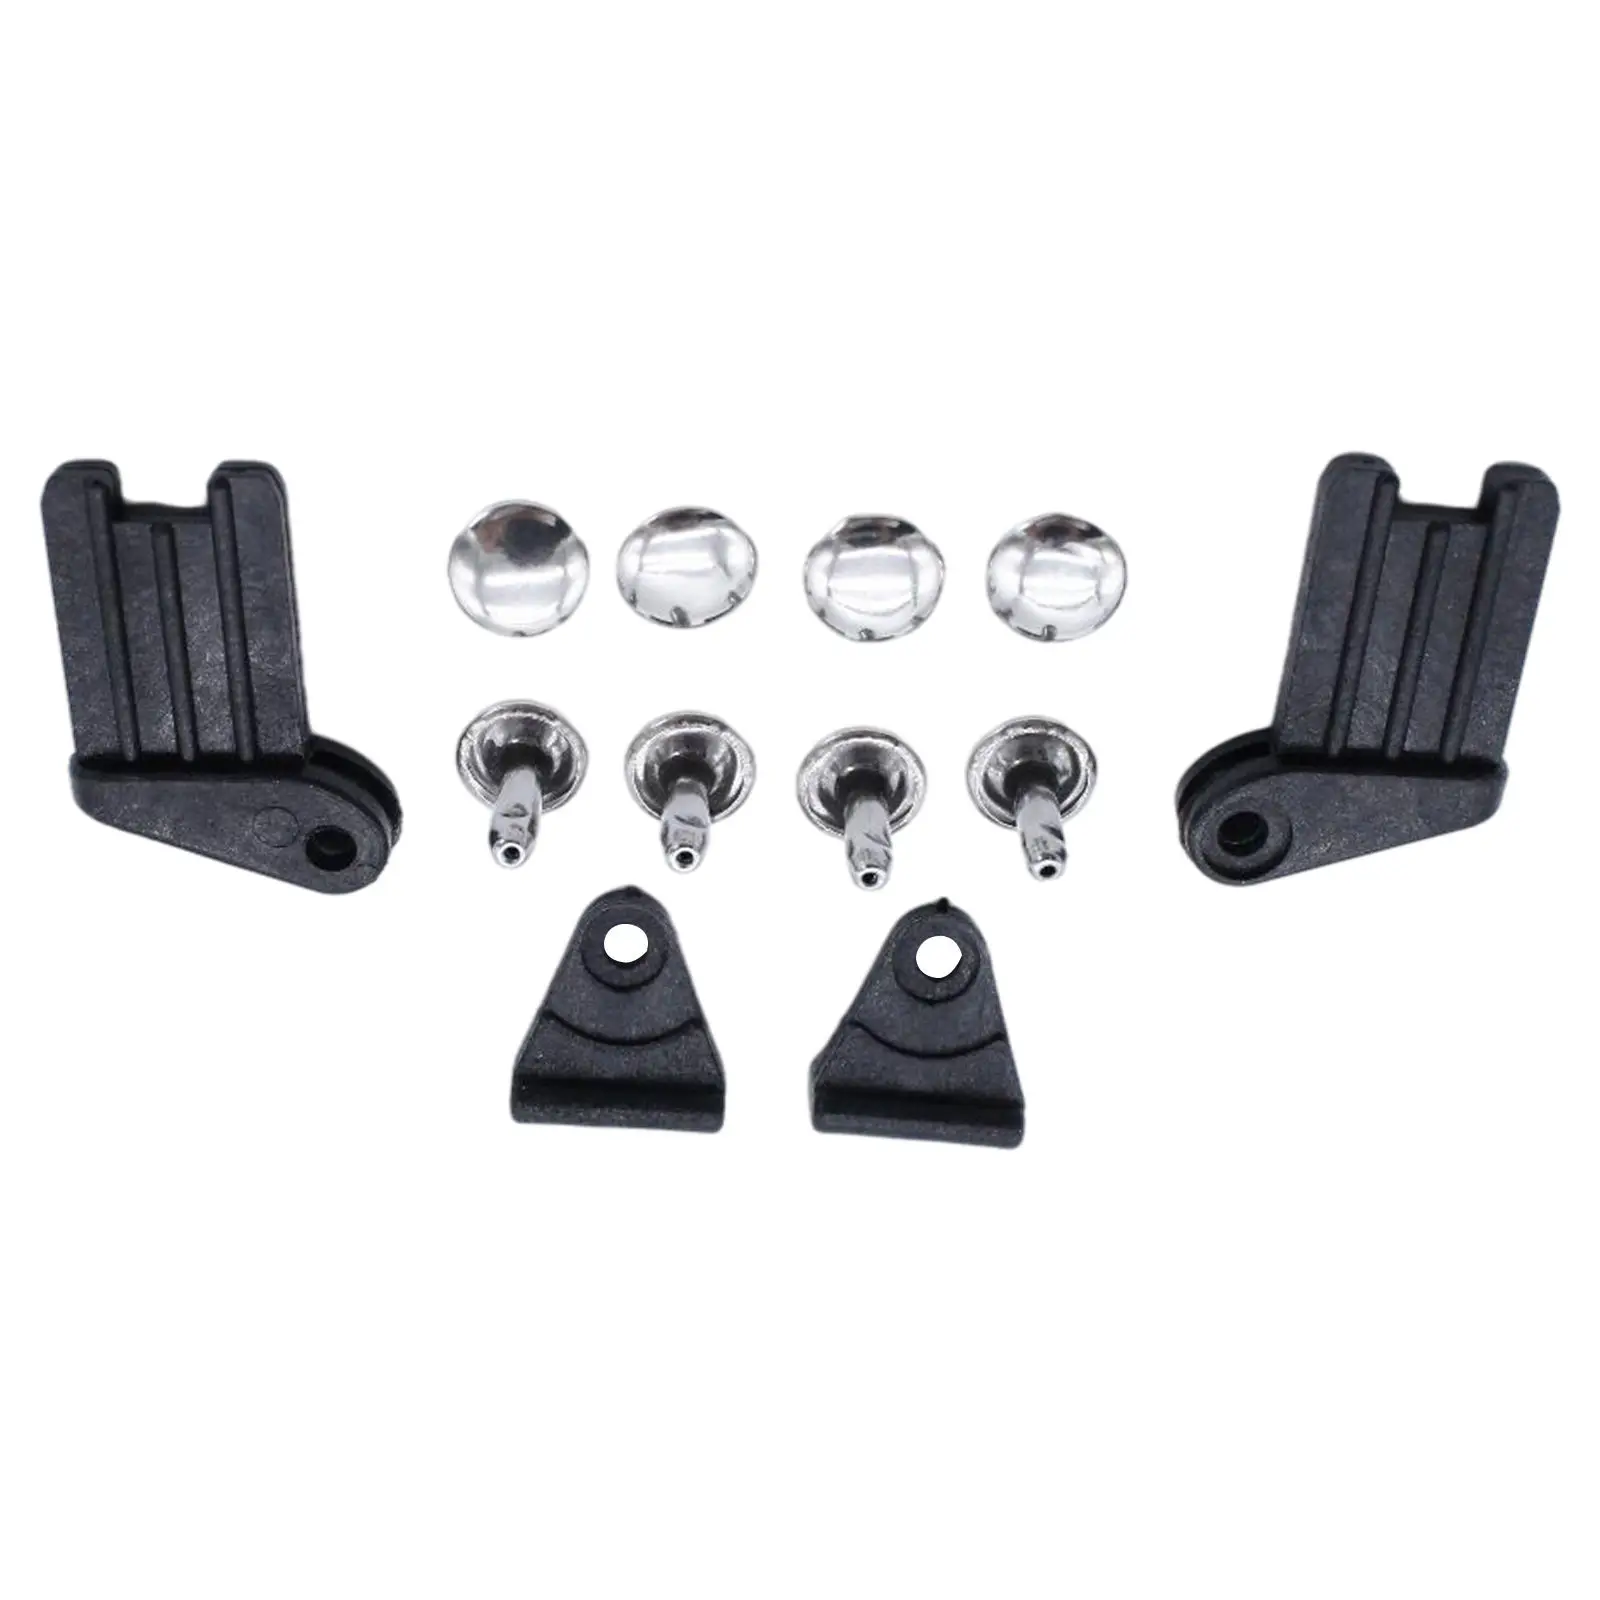 Rear Sunshade Repair Kit Replaces Automobile Parts Fit for  7Series E38 E46 E60